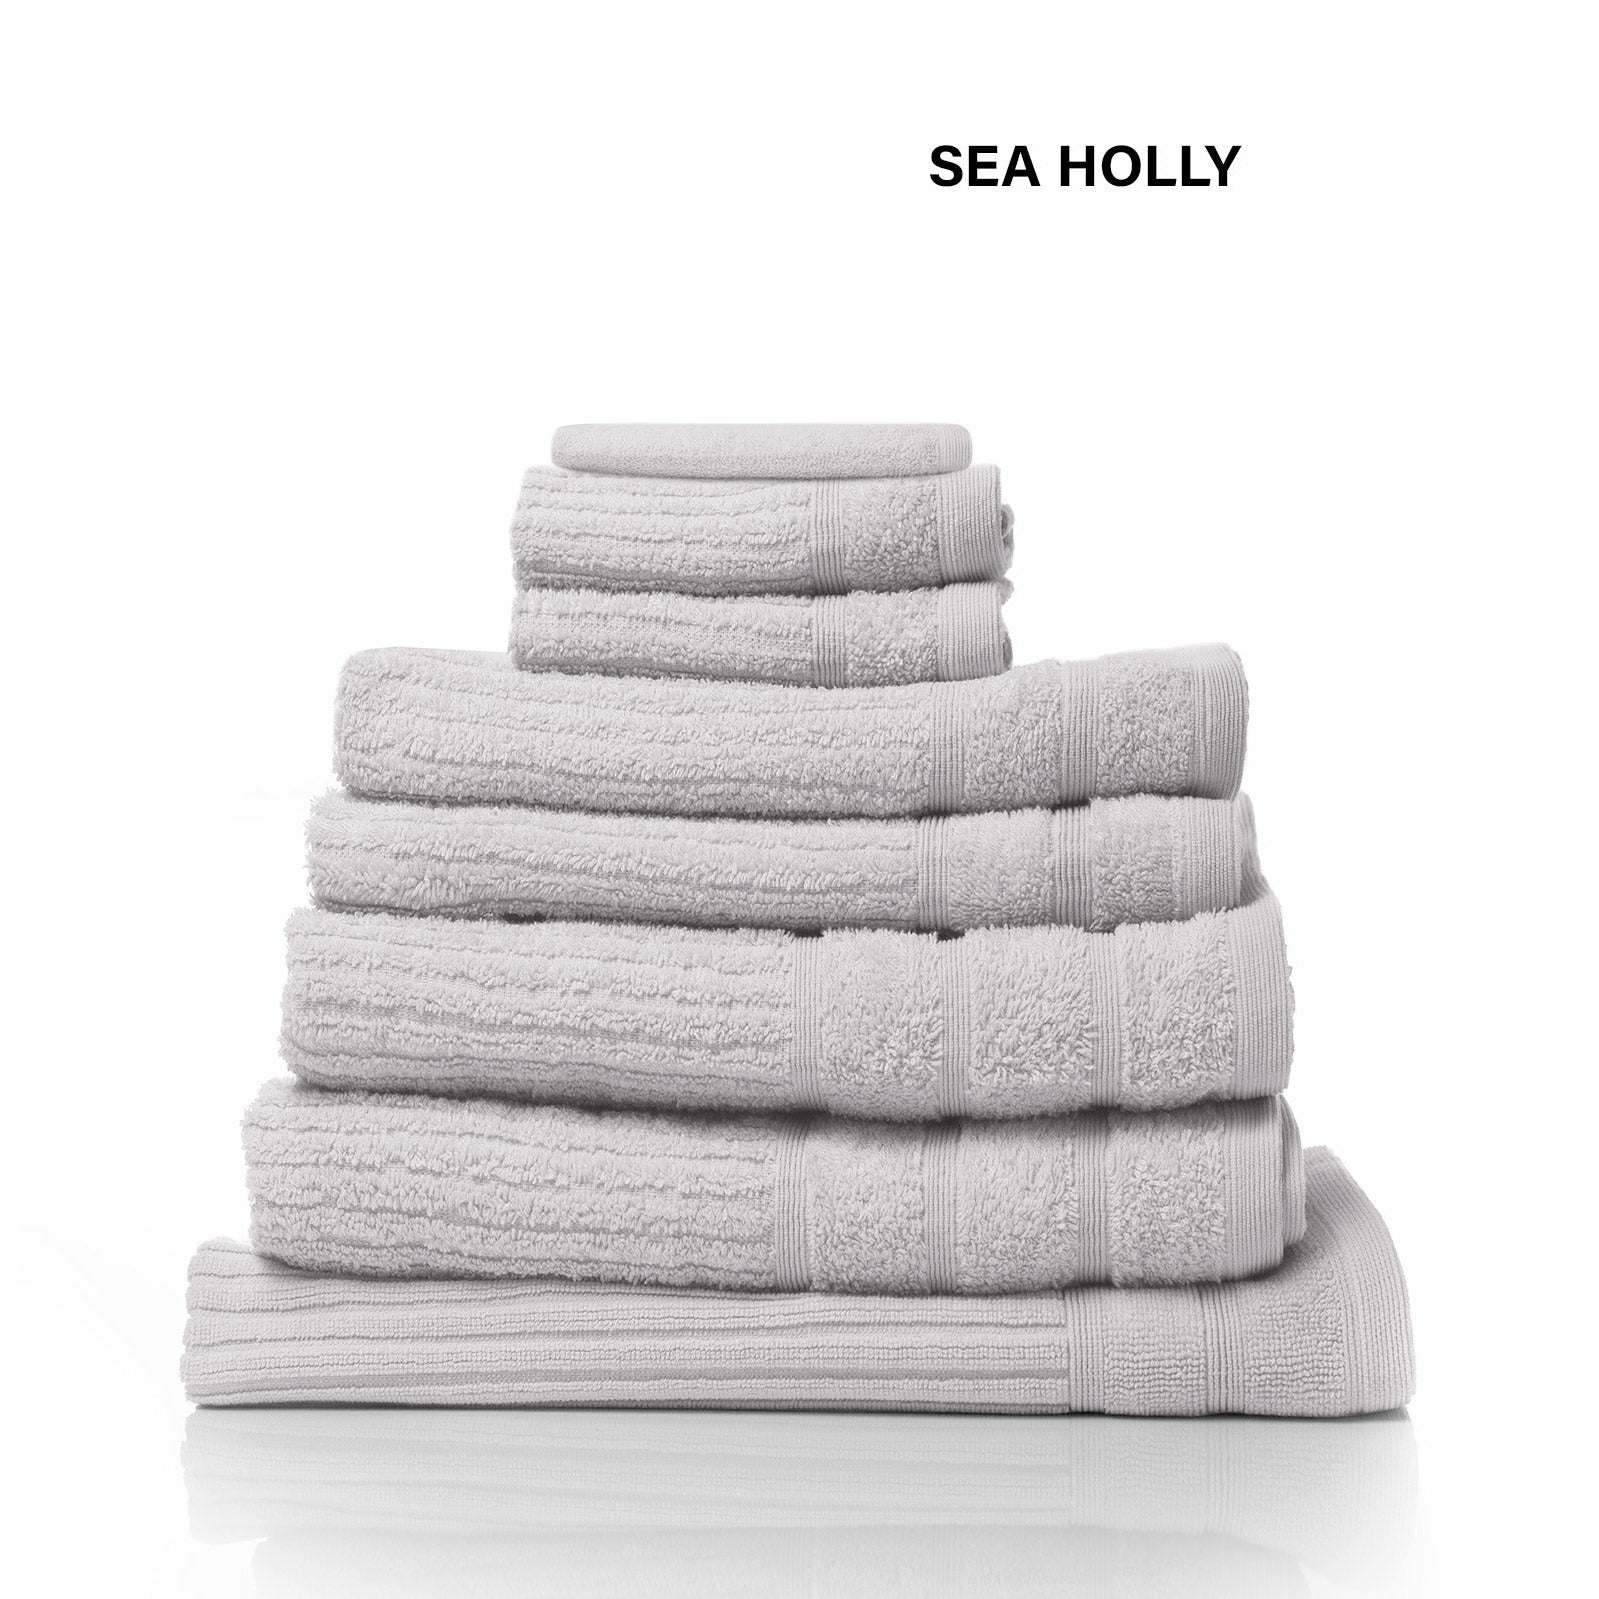 Royal Comfort Eden Egyptian Cotton 600 GSM 8 Piece Towel Pack Sea Holly